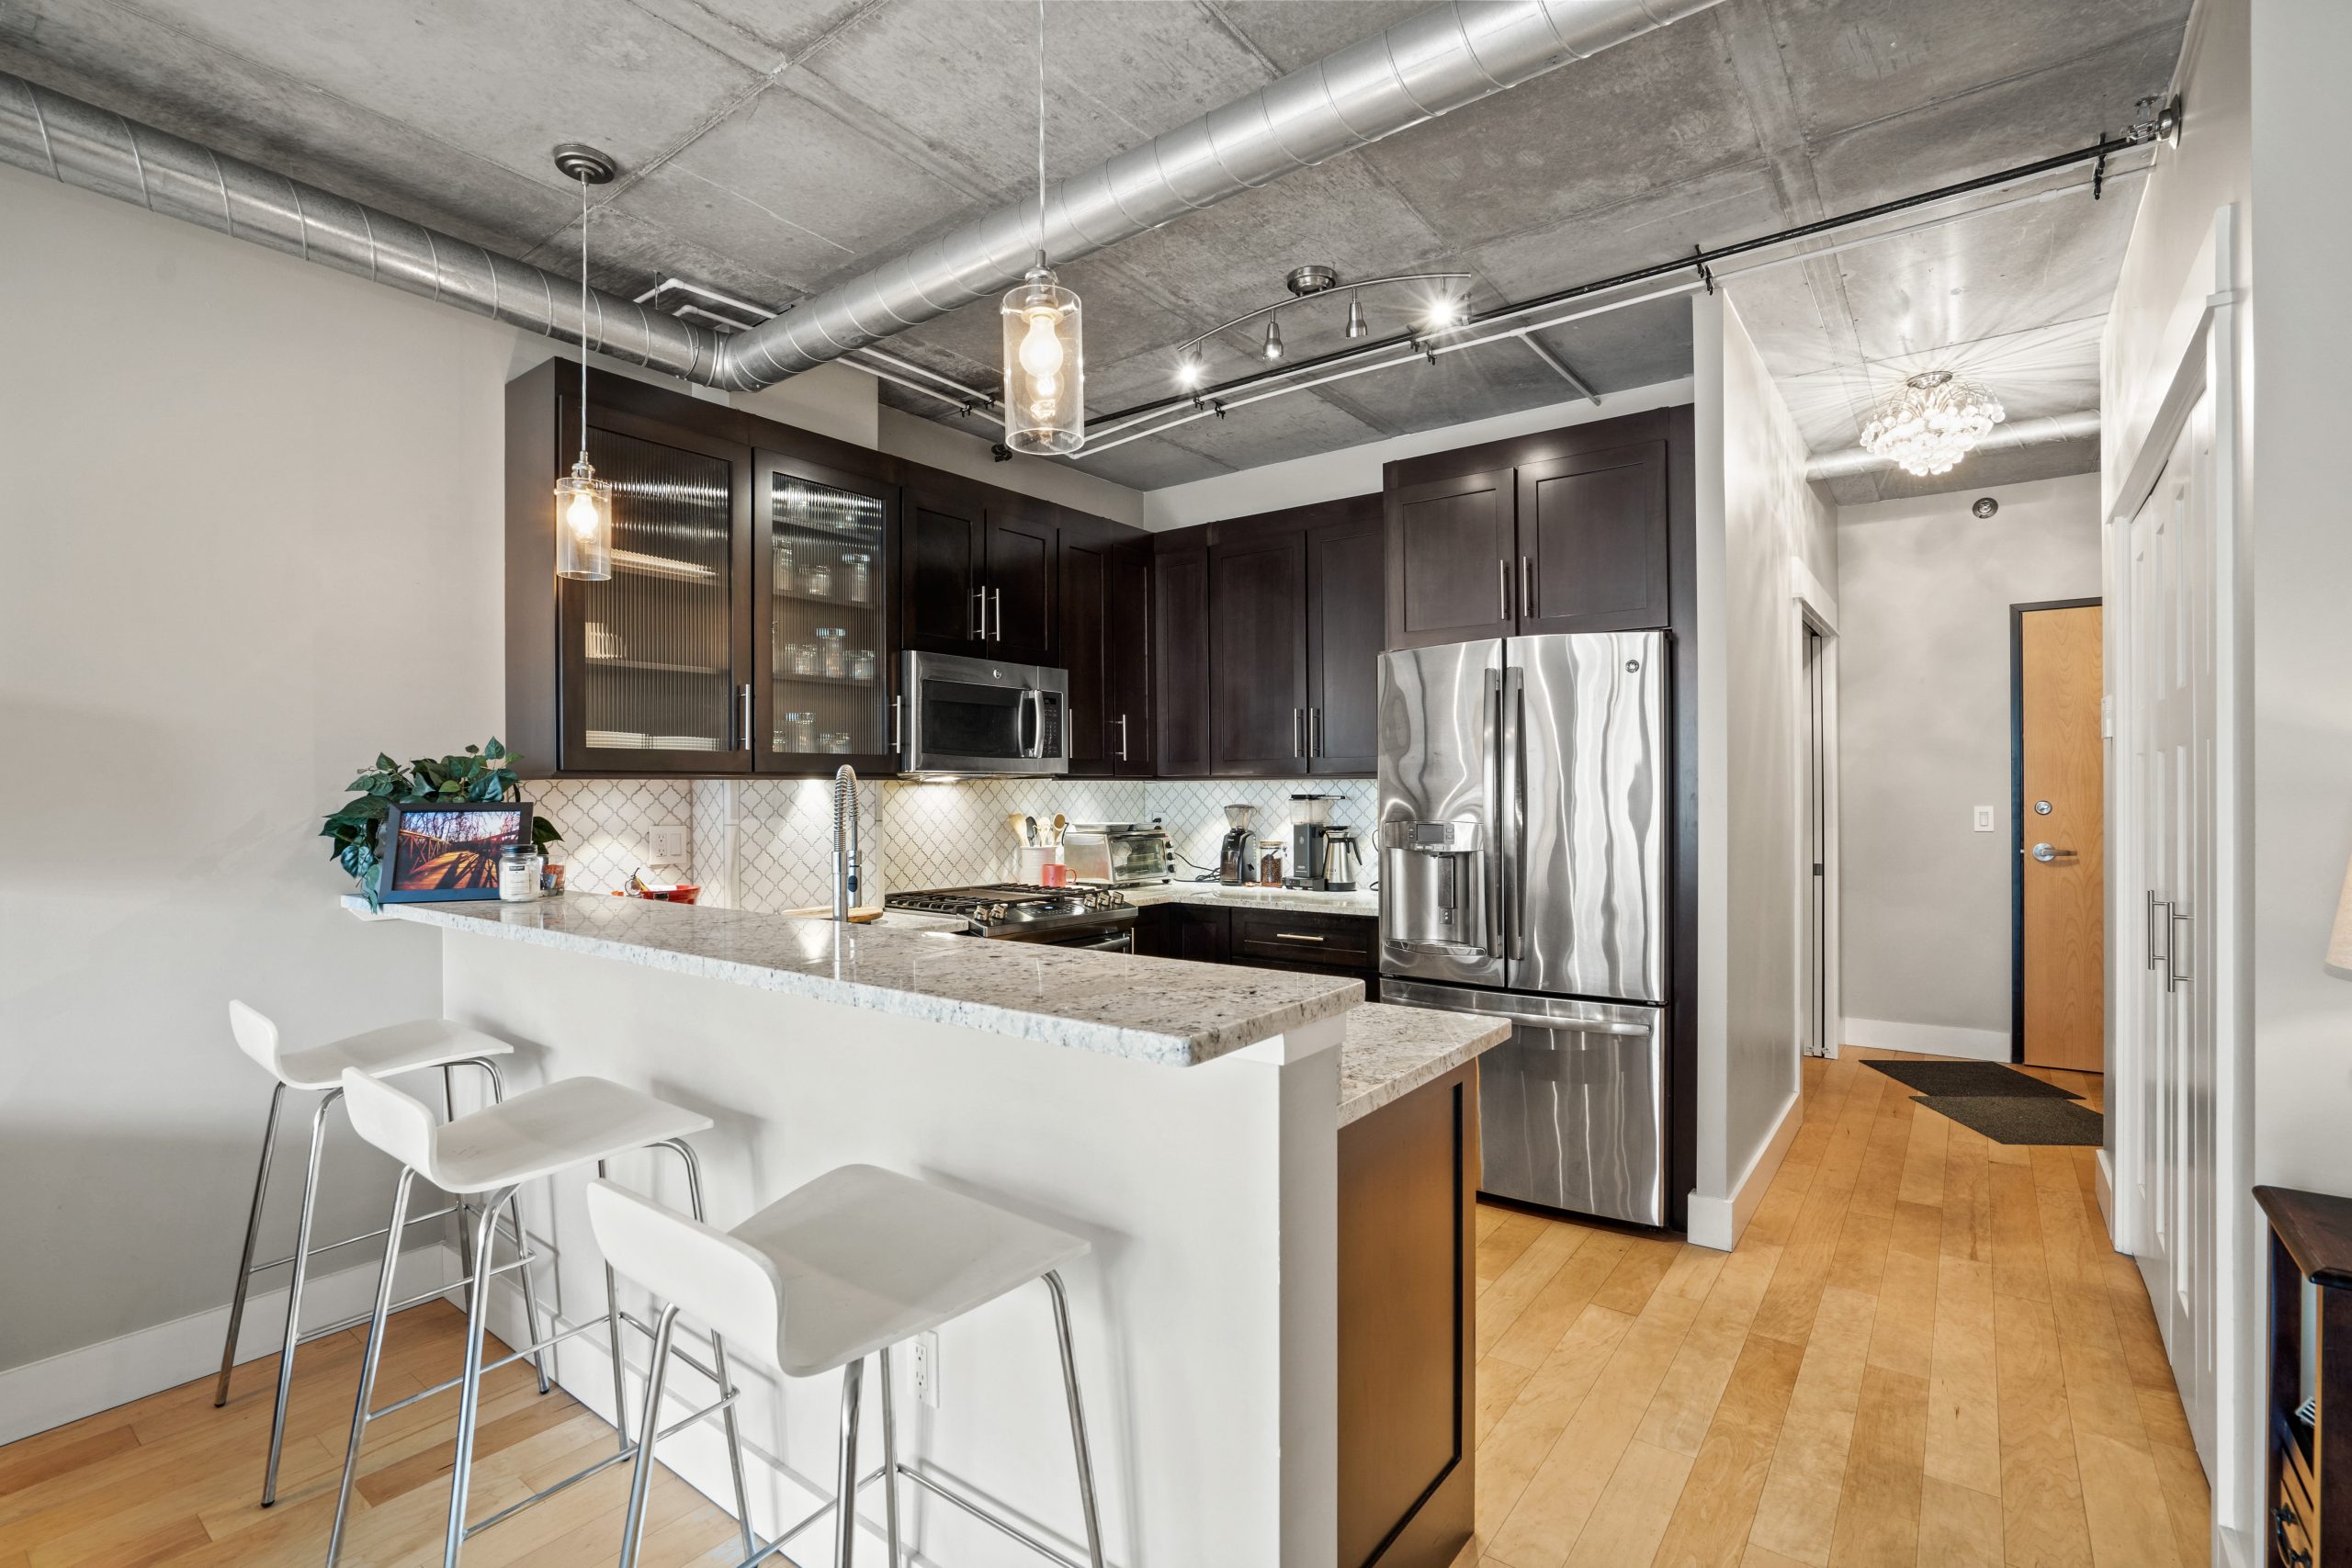 102 N. Water St., #410. Photo courtesy of Corley Real Estate.